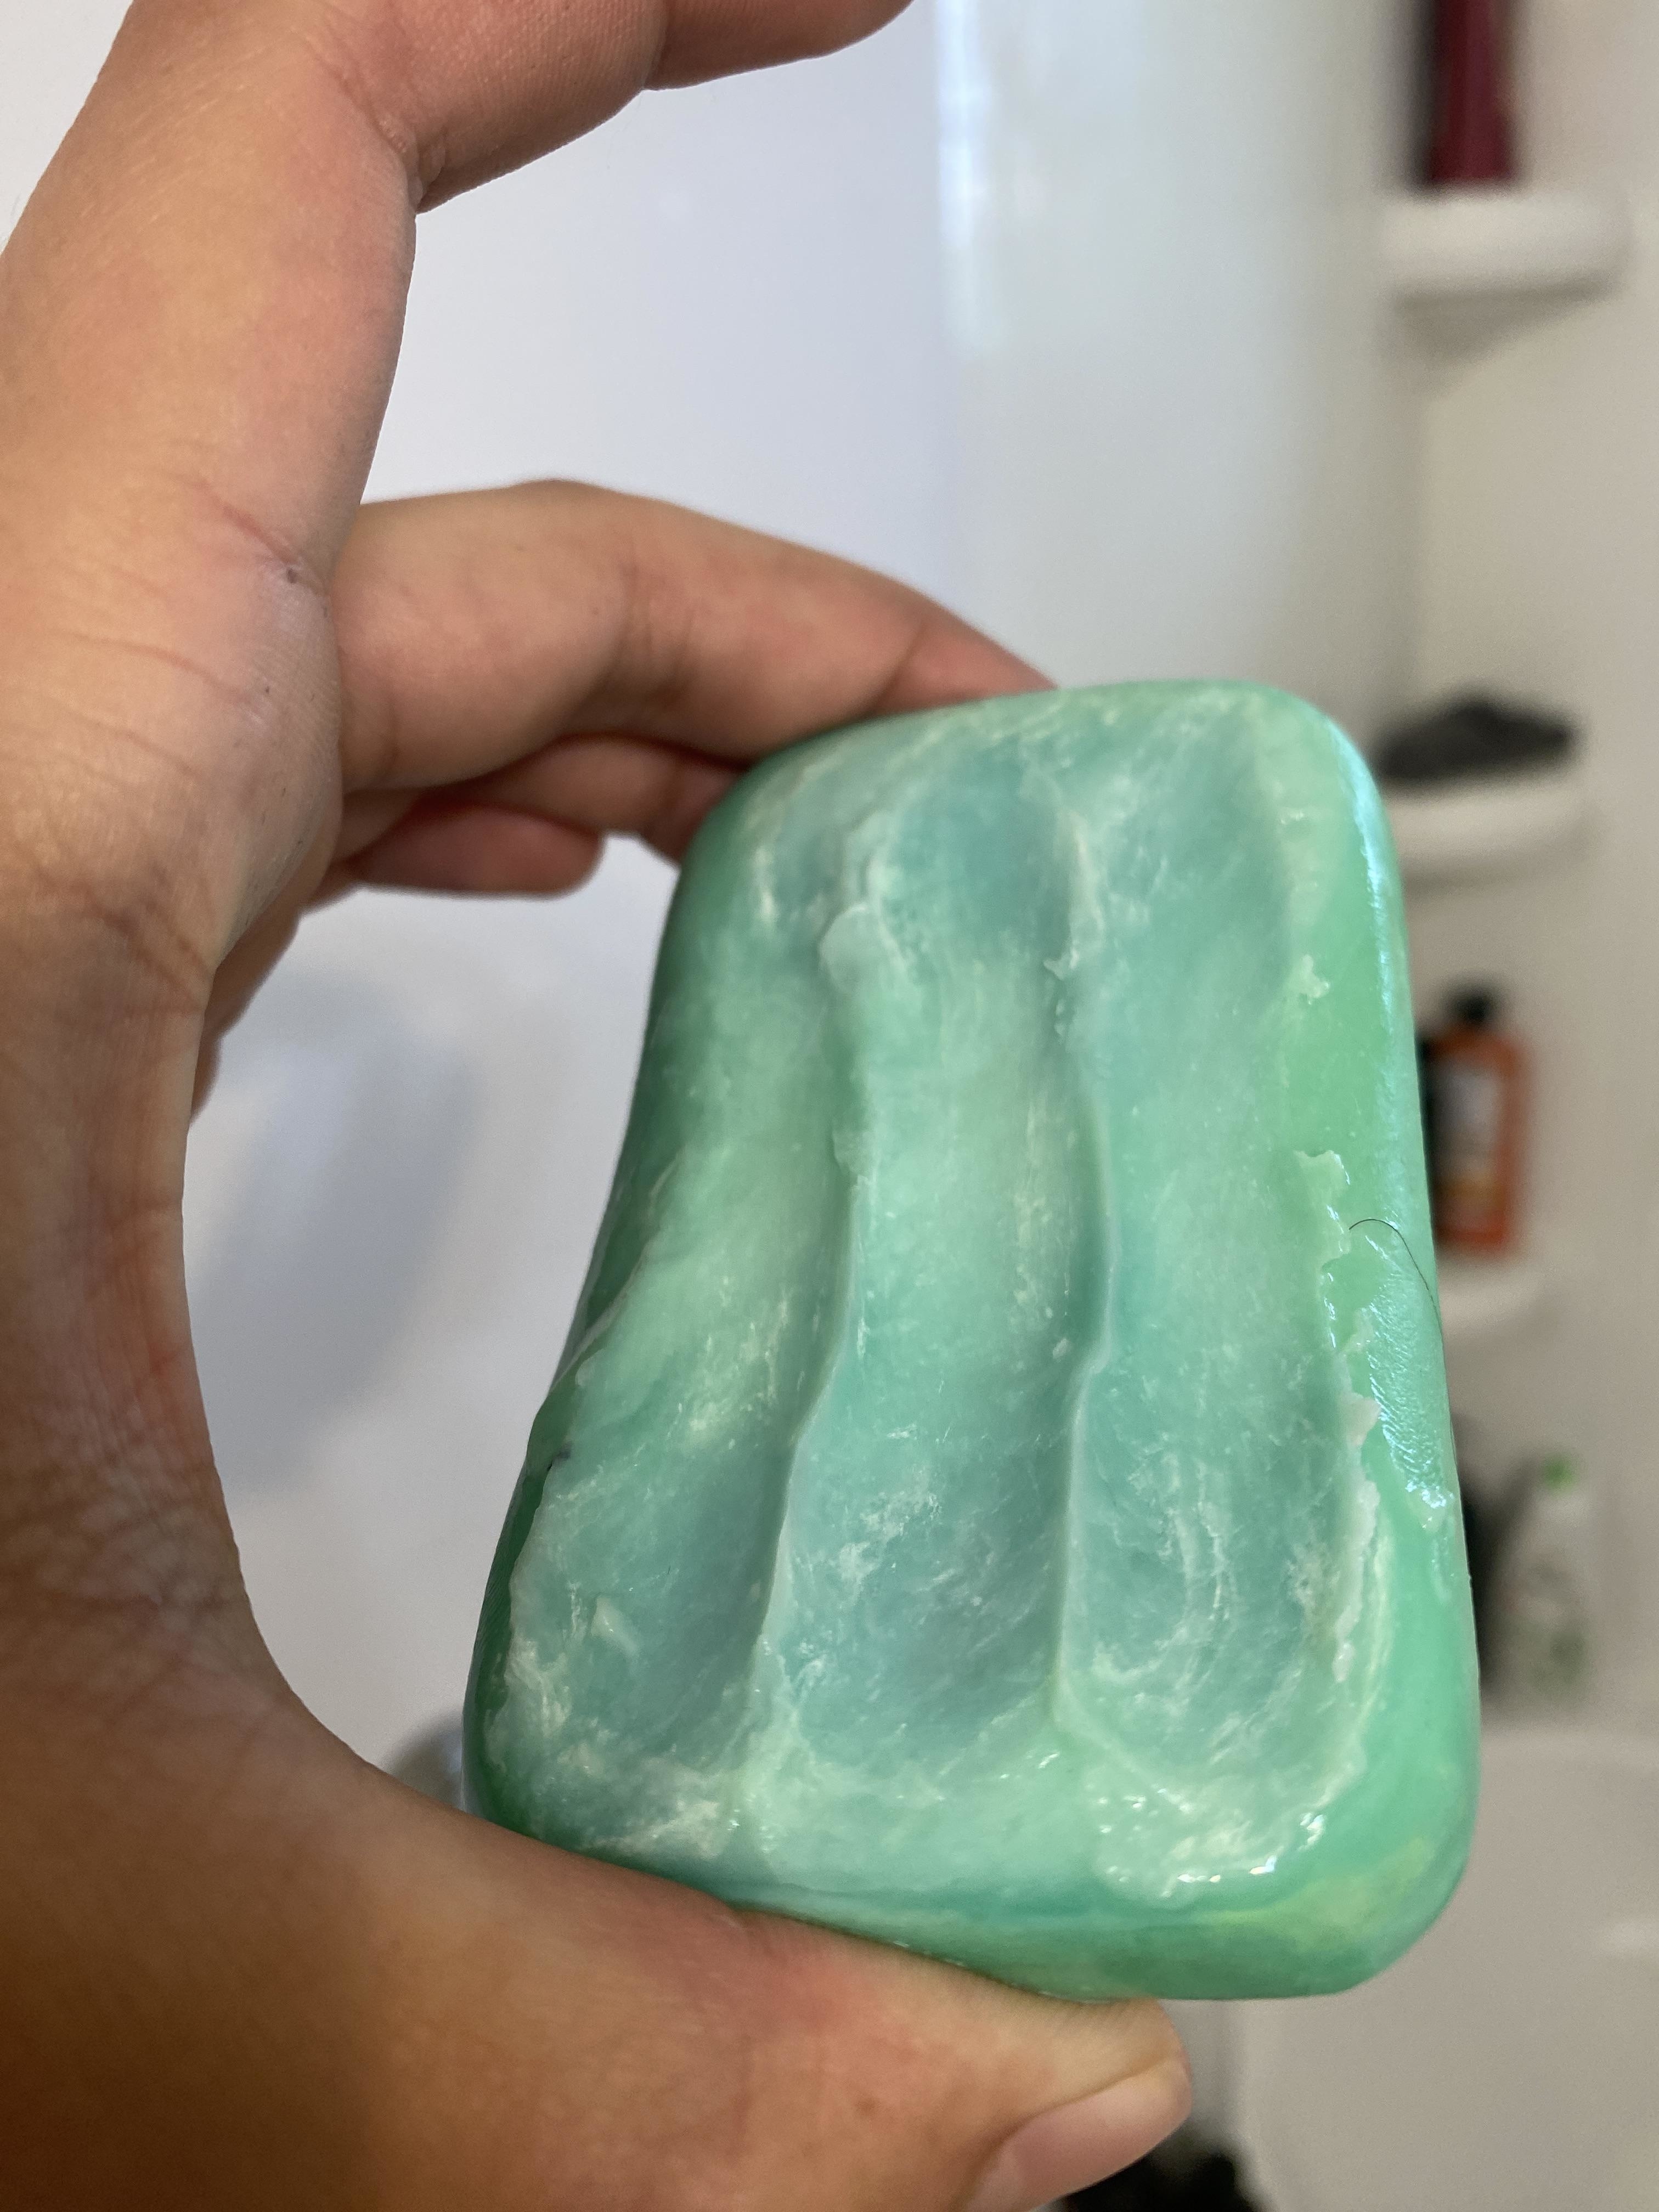 Hand holding a partially used bar of green soap with a bathroom background